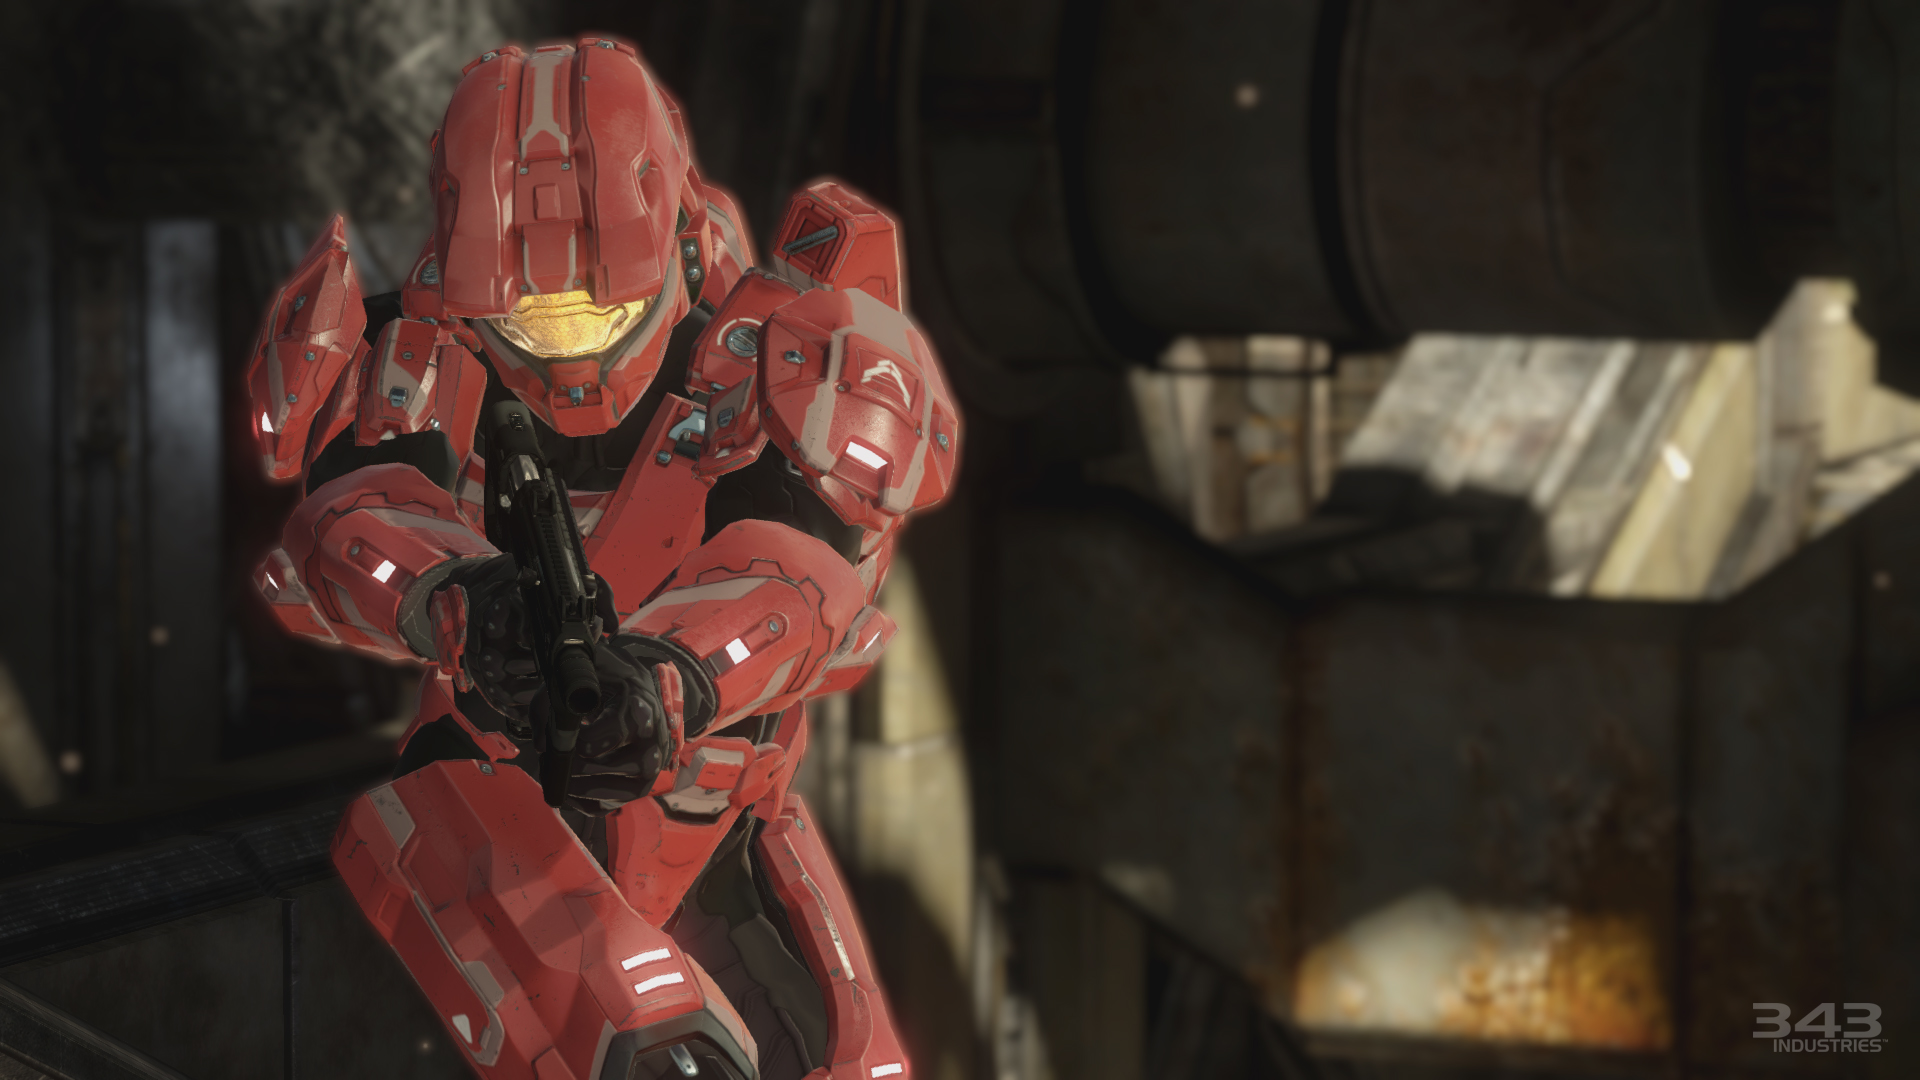 Halo: The Master Chief Collection | Games | Halo - Official Site1920 x 1080